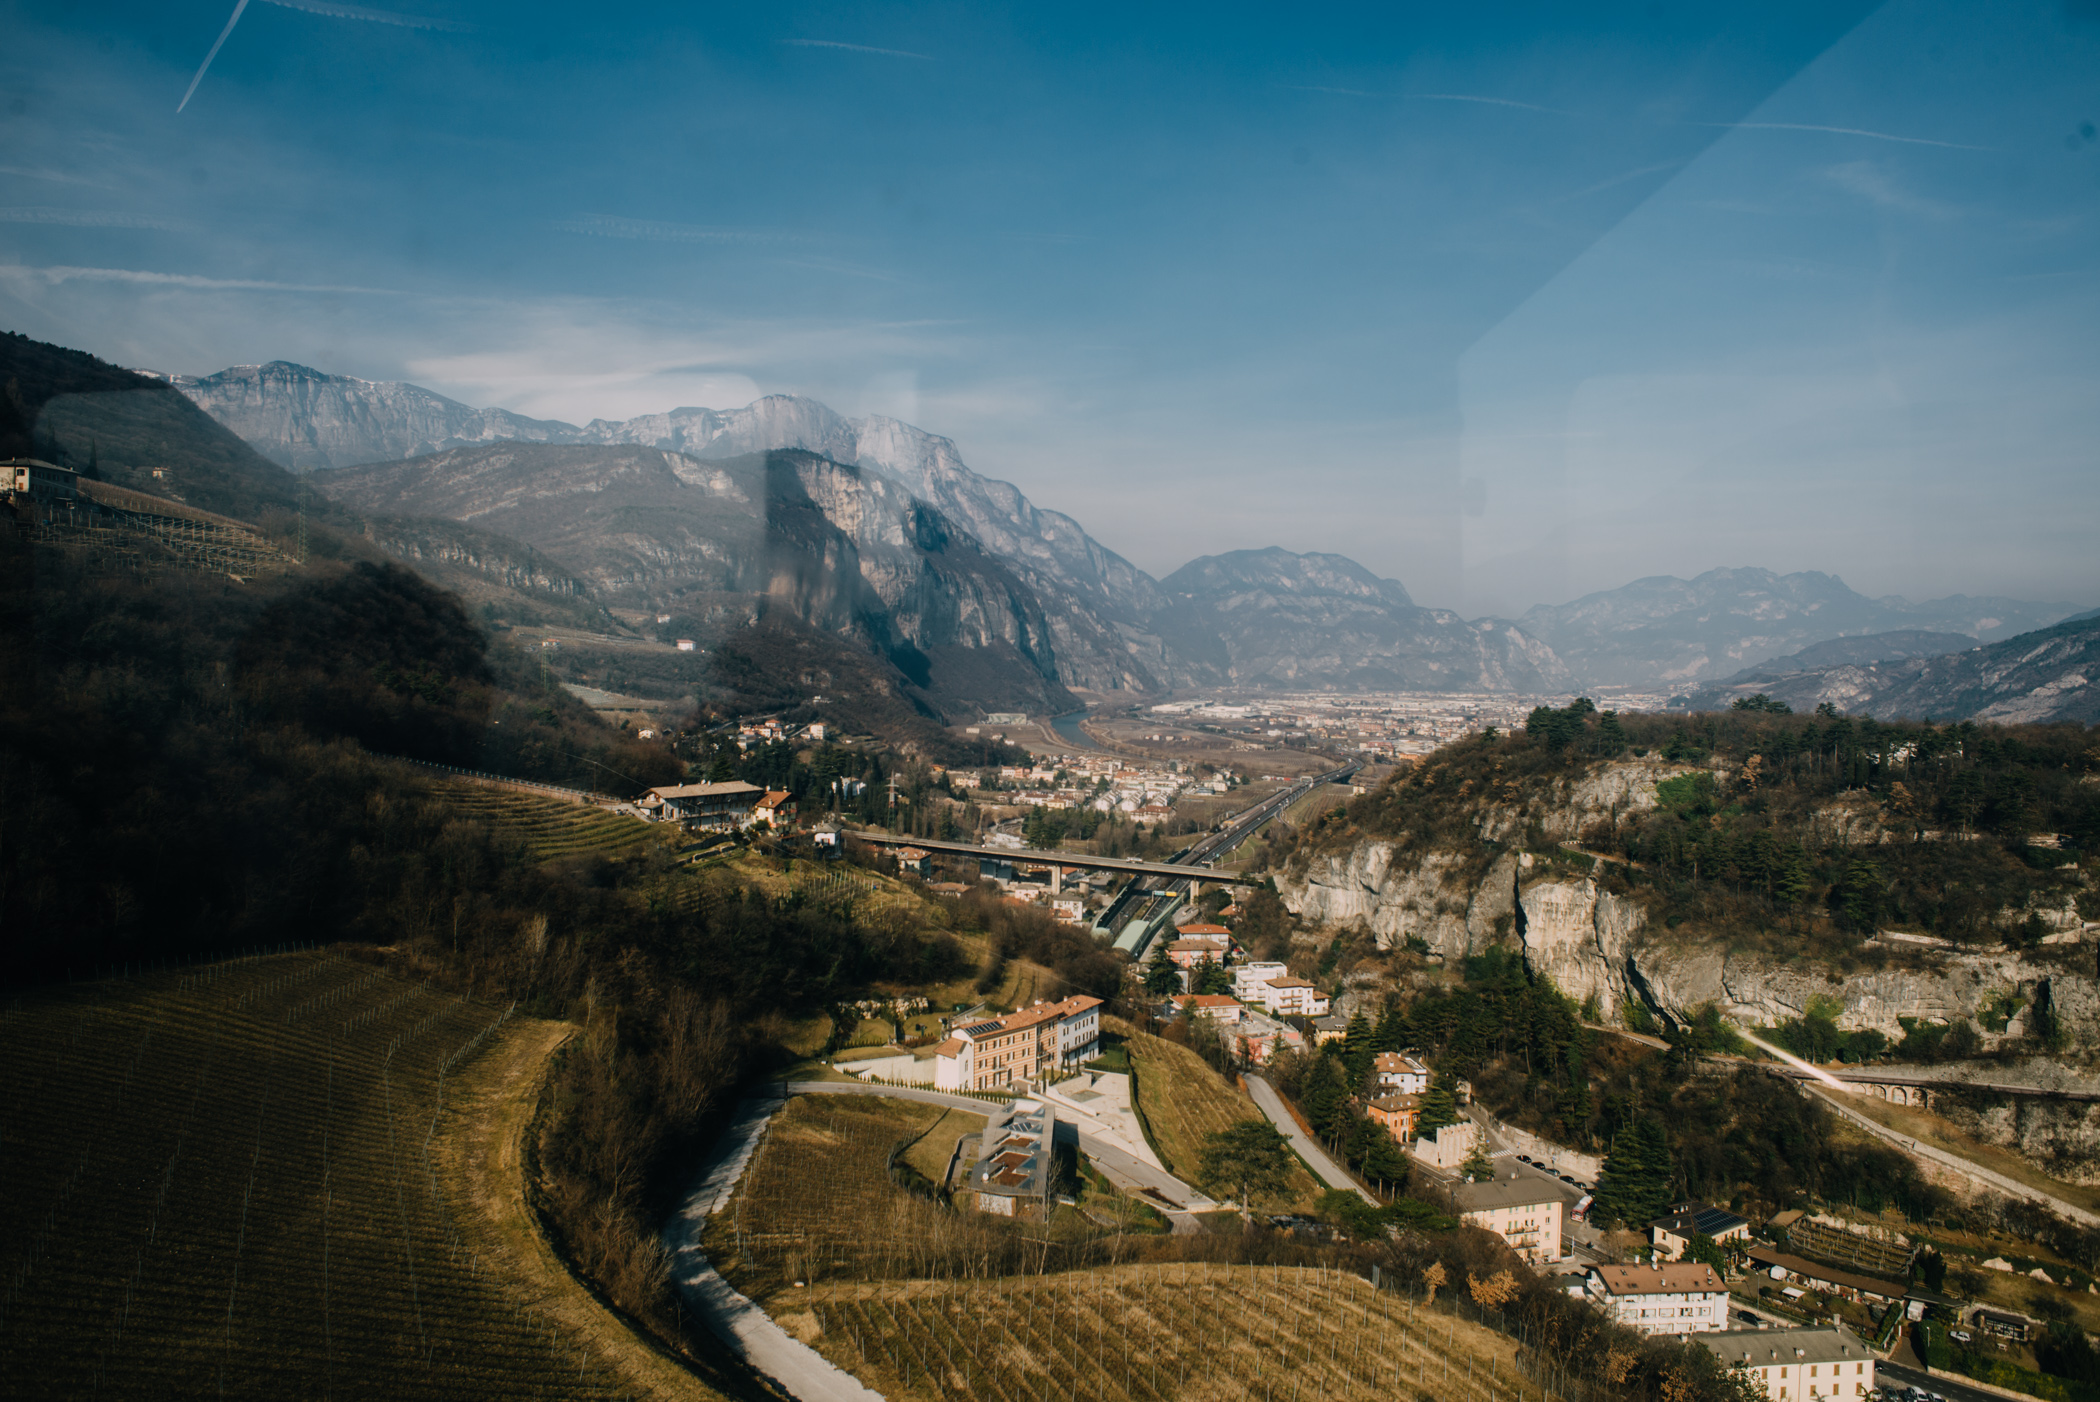 View from the cable car from Trento to Sardagna, a town at the top of the mountain.